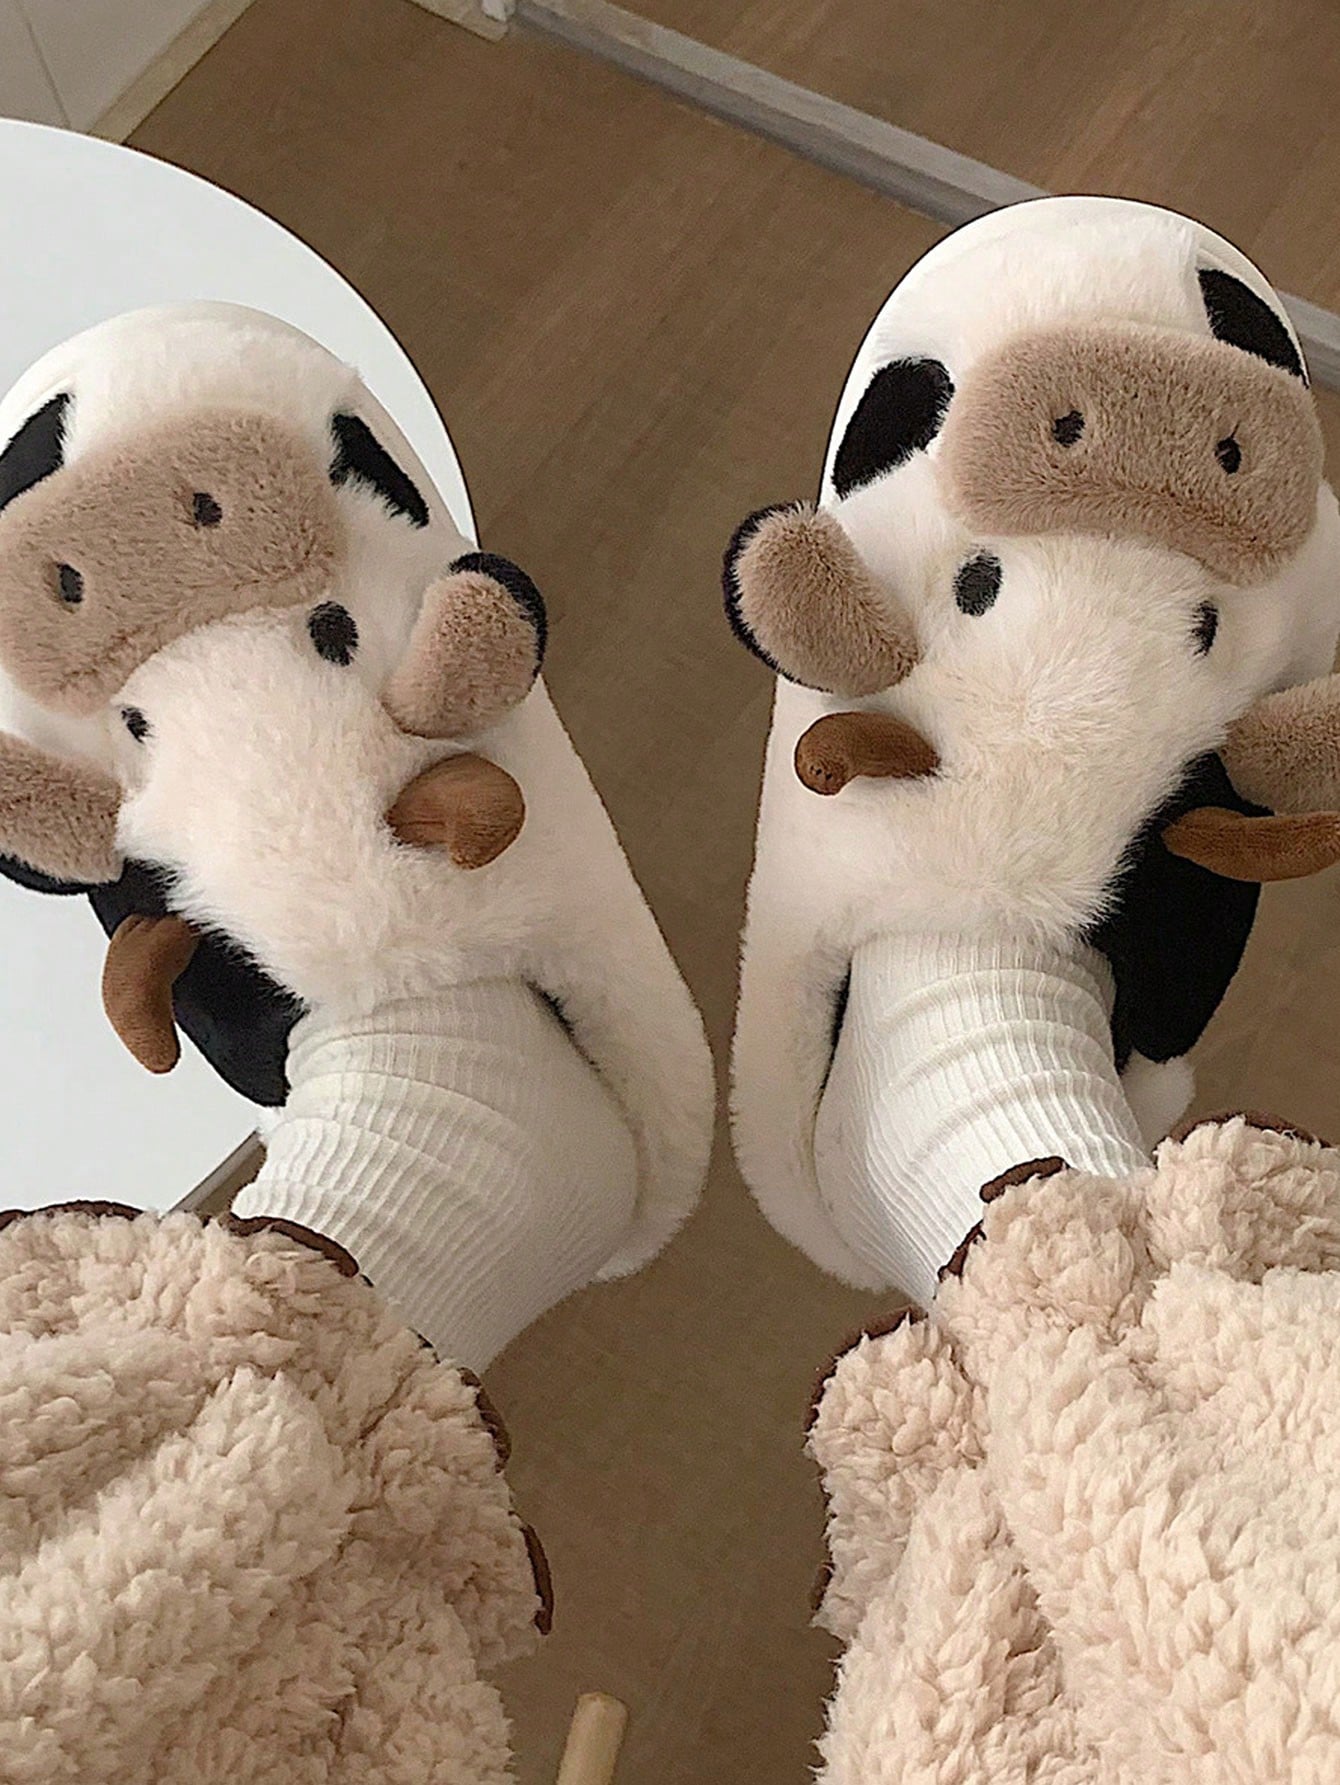 Home Animal Cartoon Patterned Cute Slippers, Warm, Comfortable And Anti-Slip